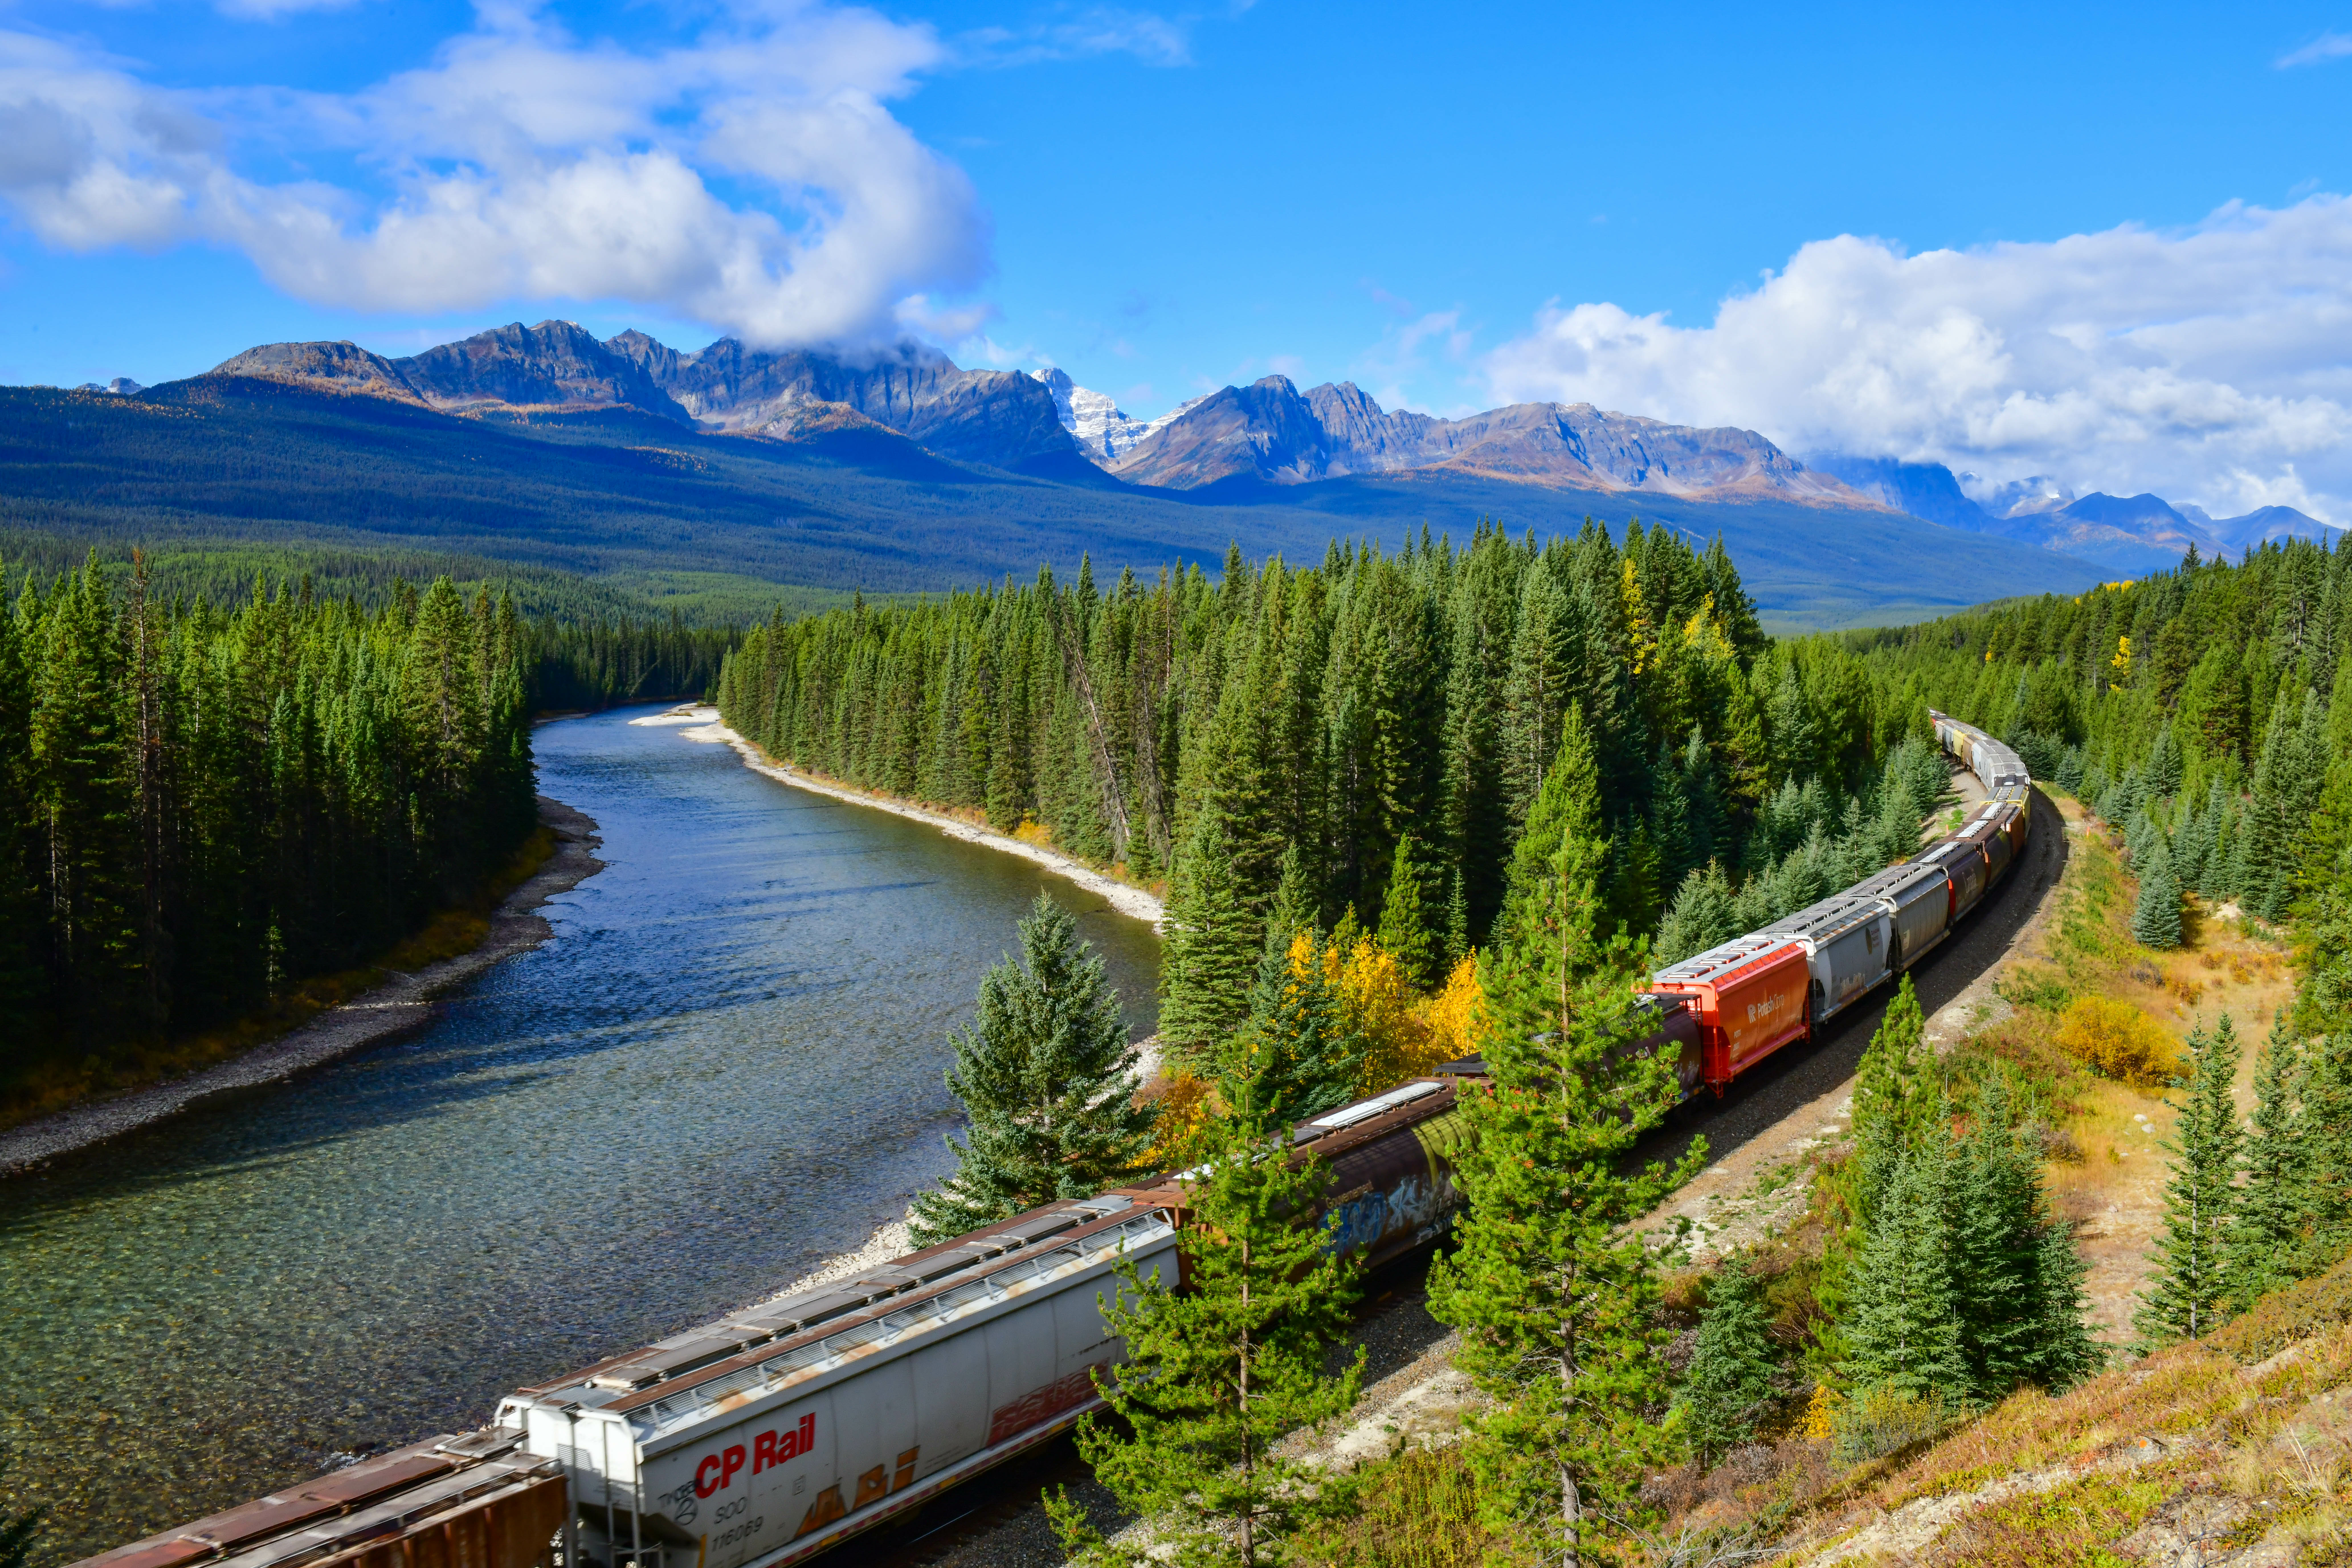 CP Rail train moving through Alberta Rockies, through forest with river beside and mountains in the background.